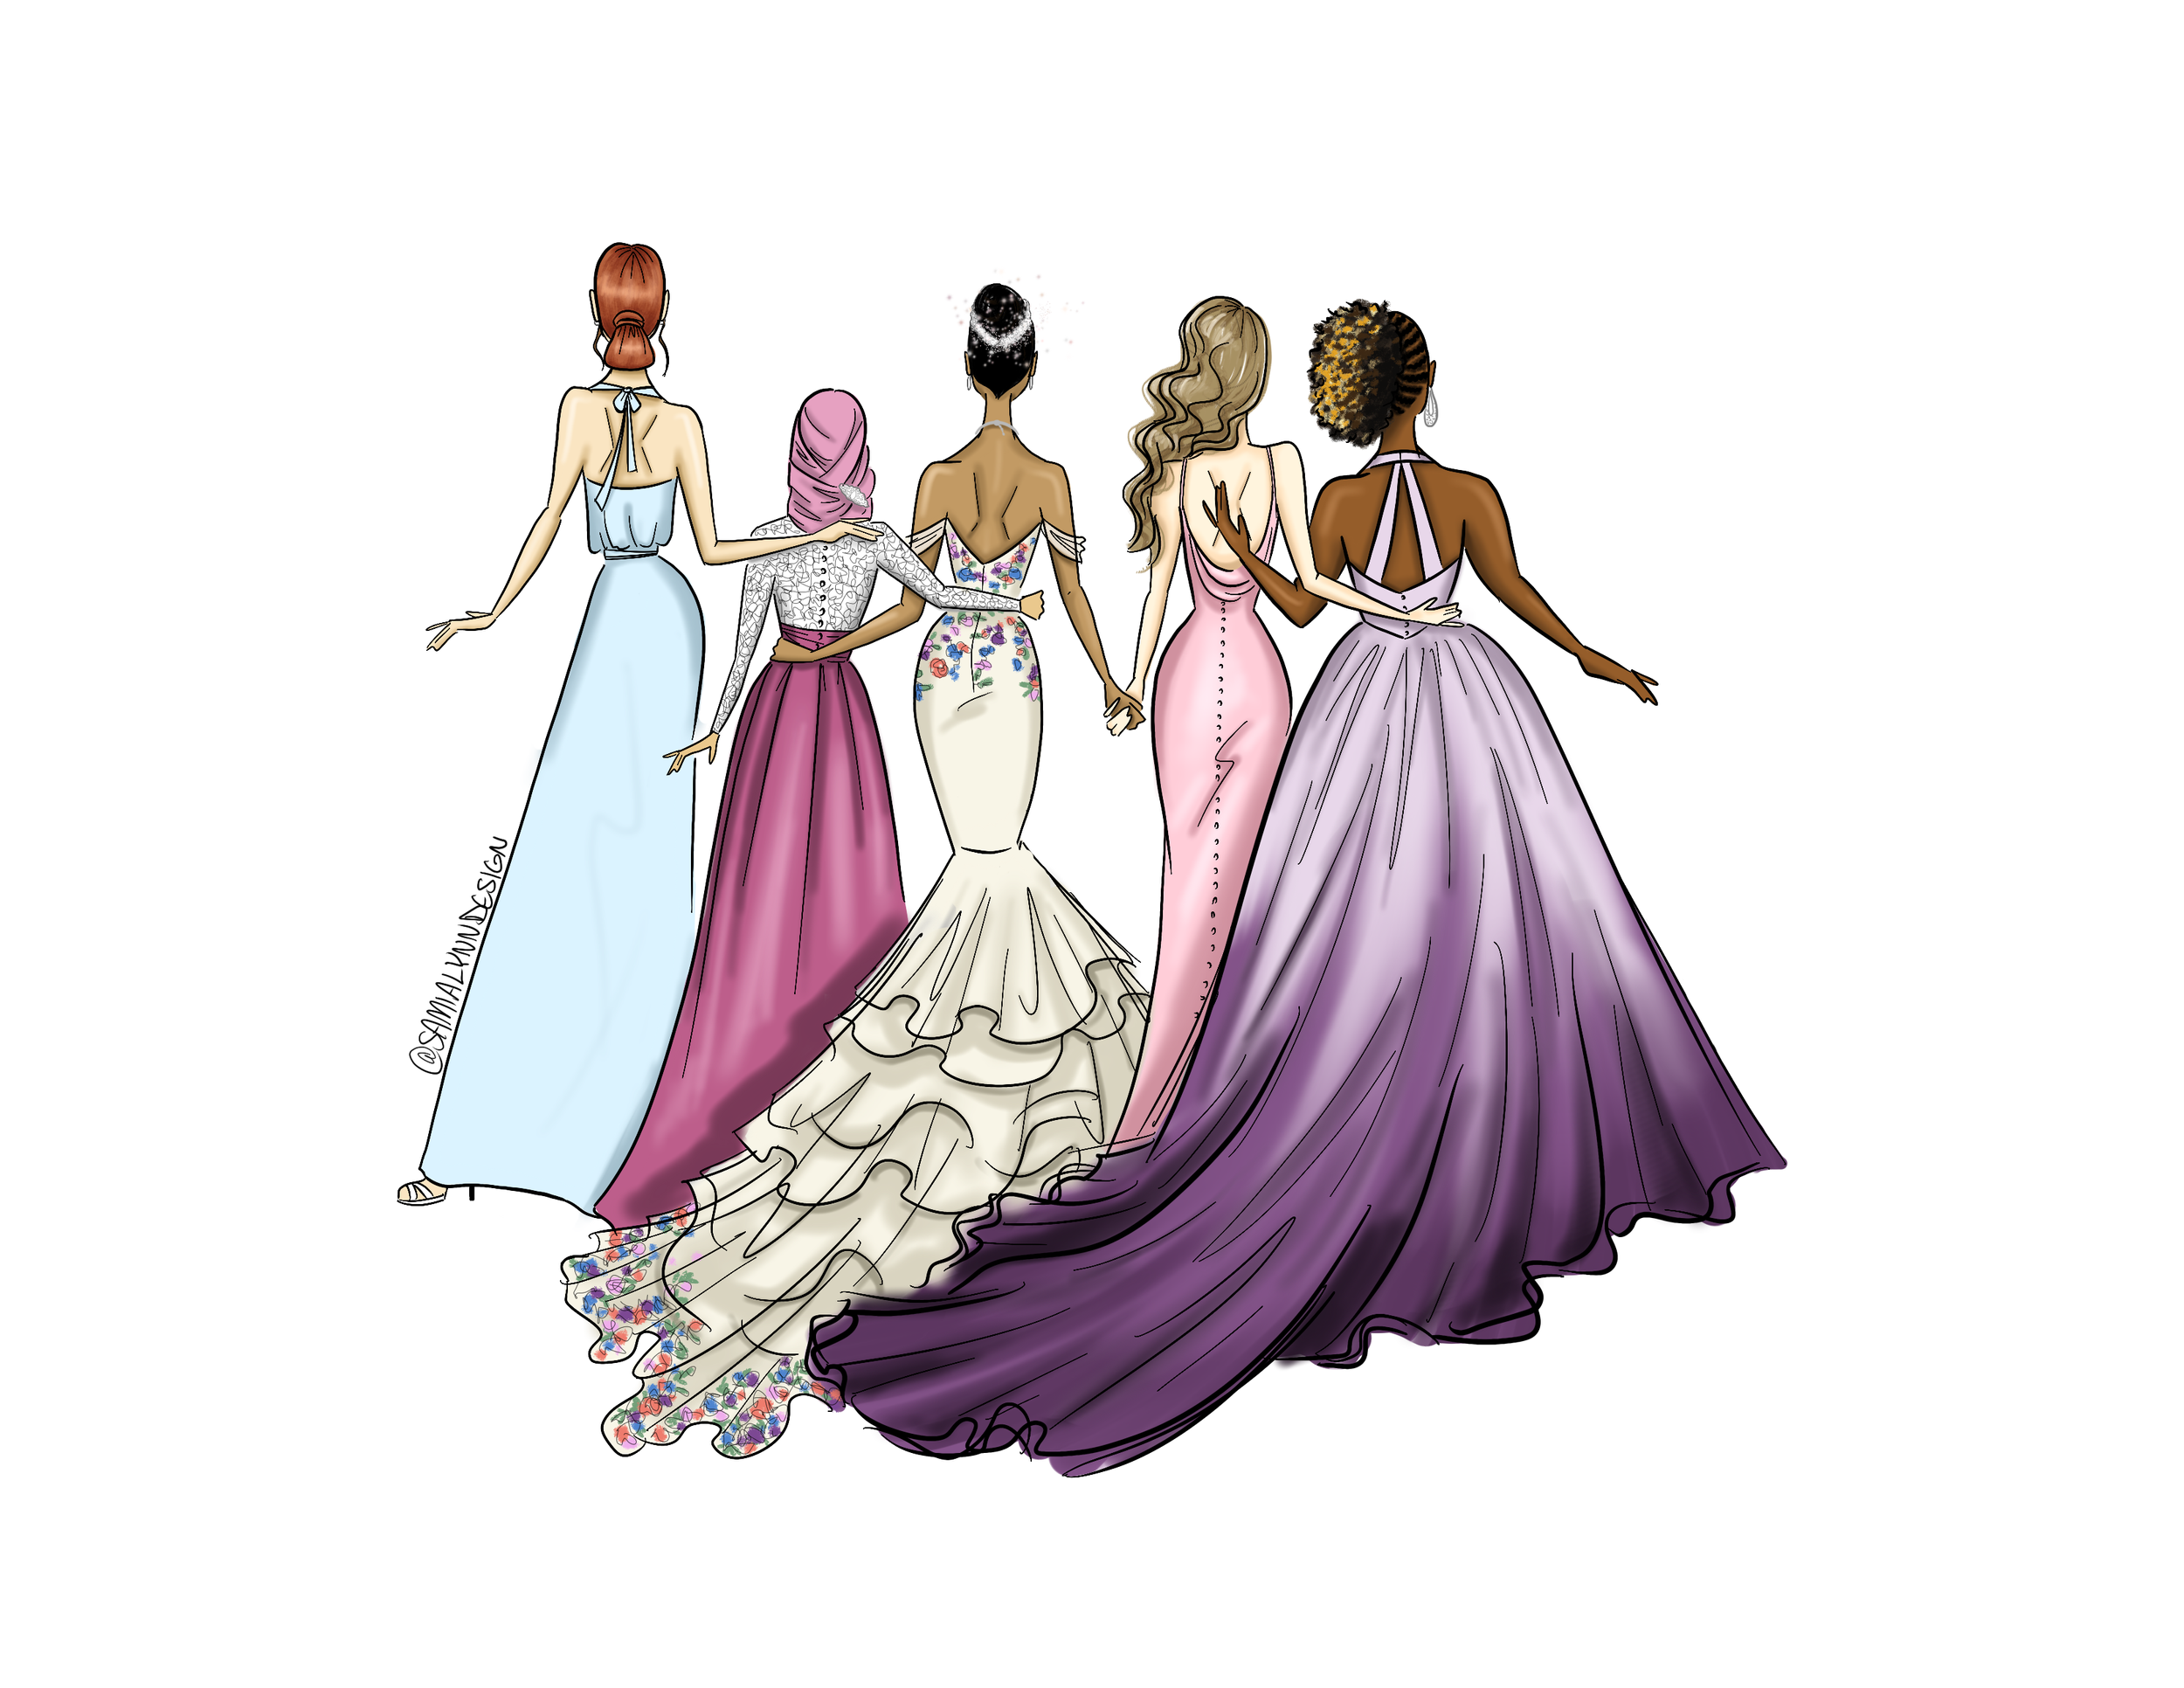 My Ideal Wedding dress  Fashion drawing dresses, Dress sketches, Dress  design sketches